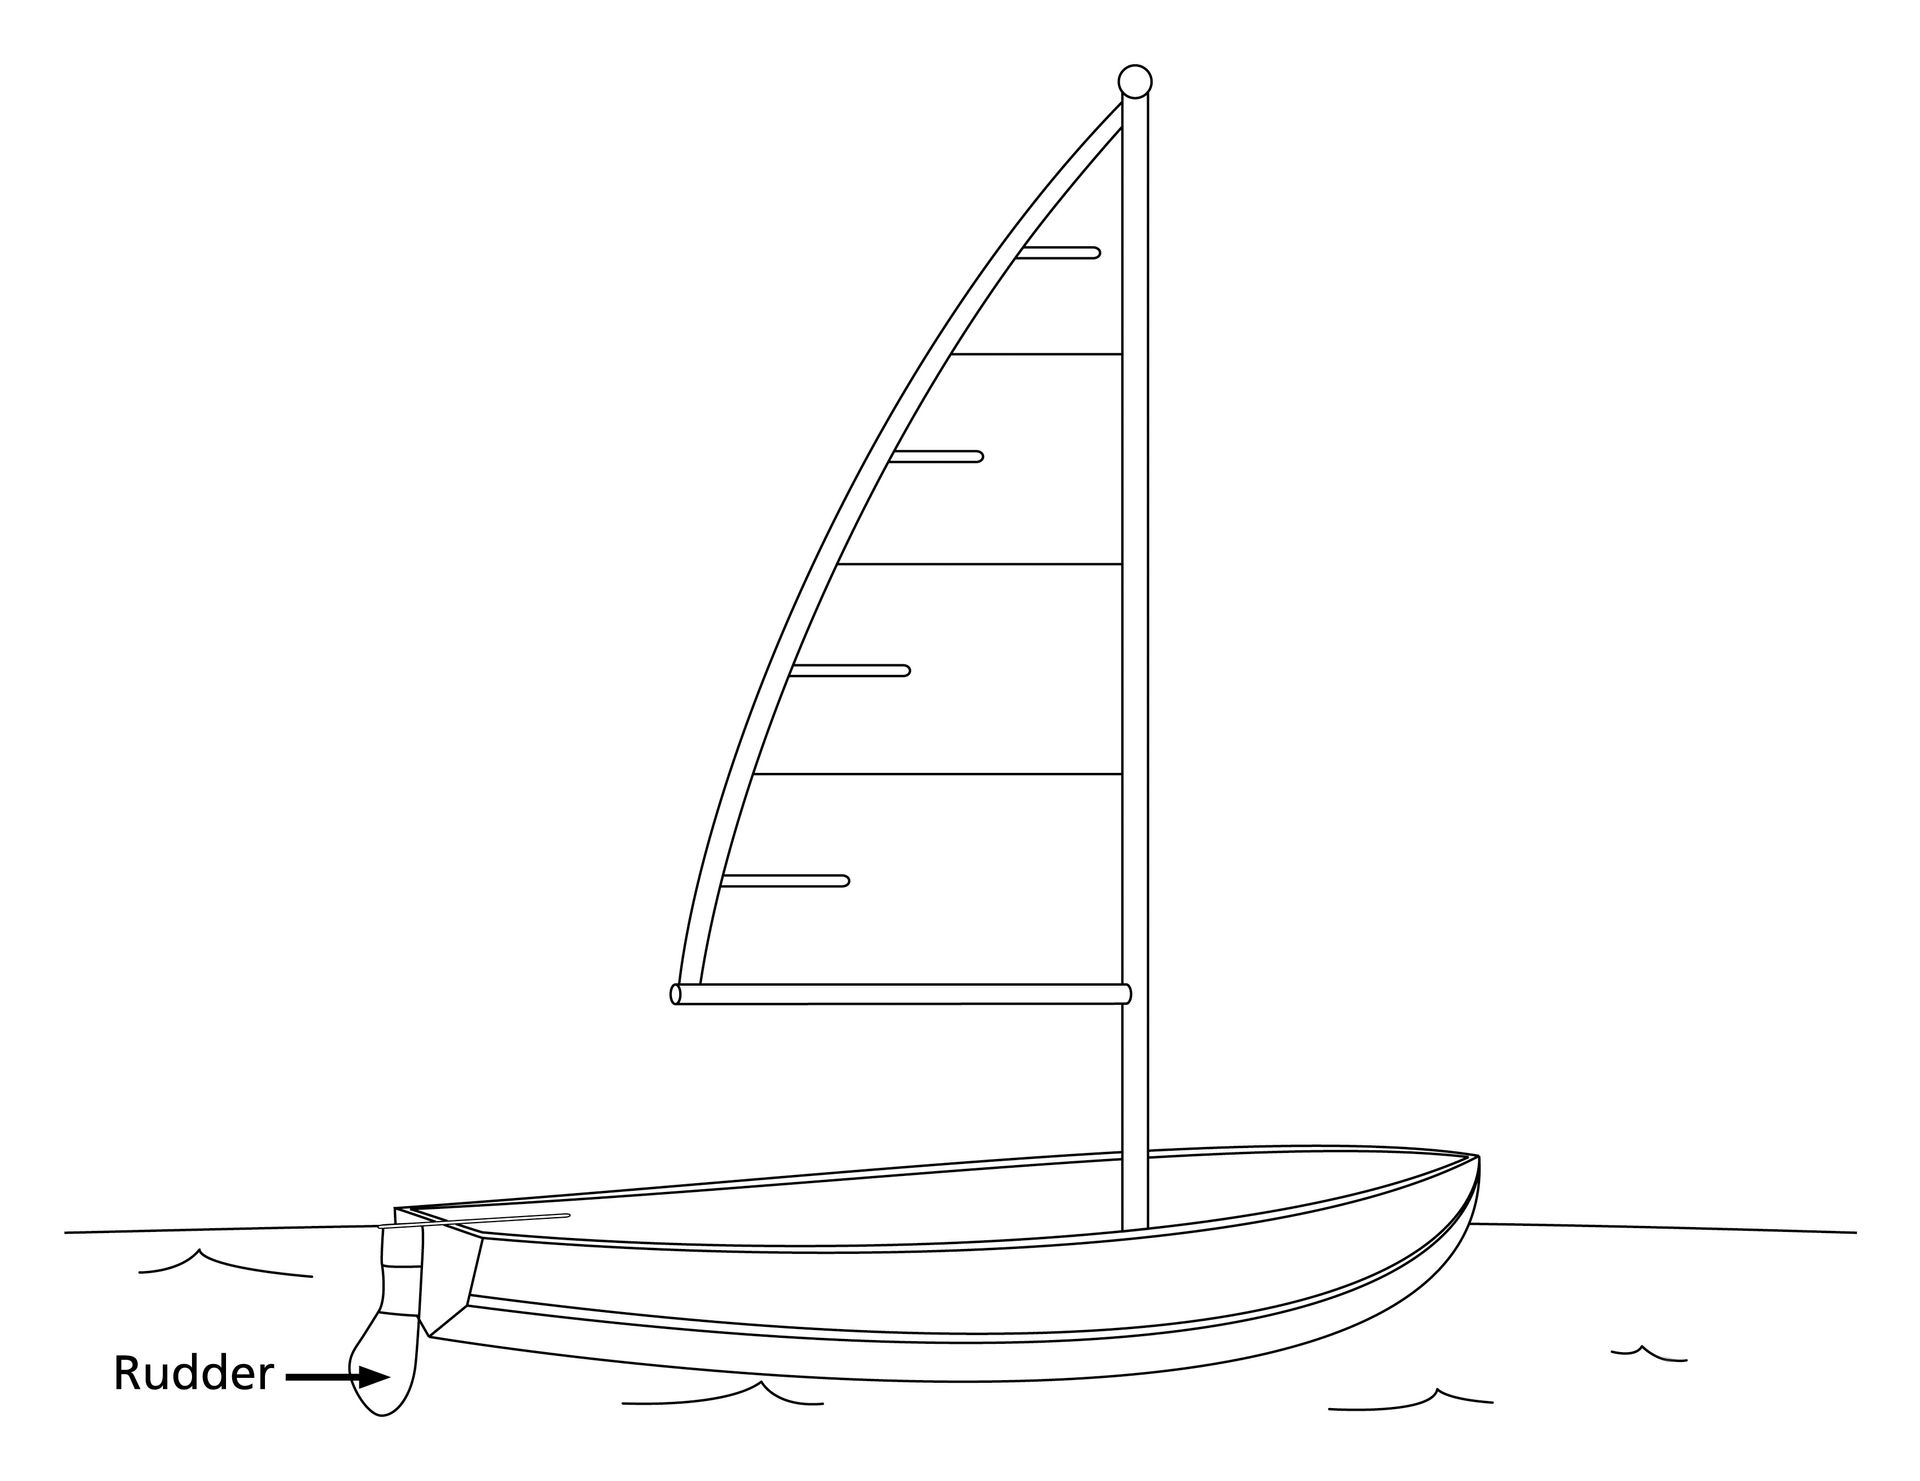 A drawing of a sailboat with the rudder showing.